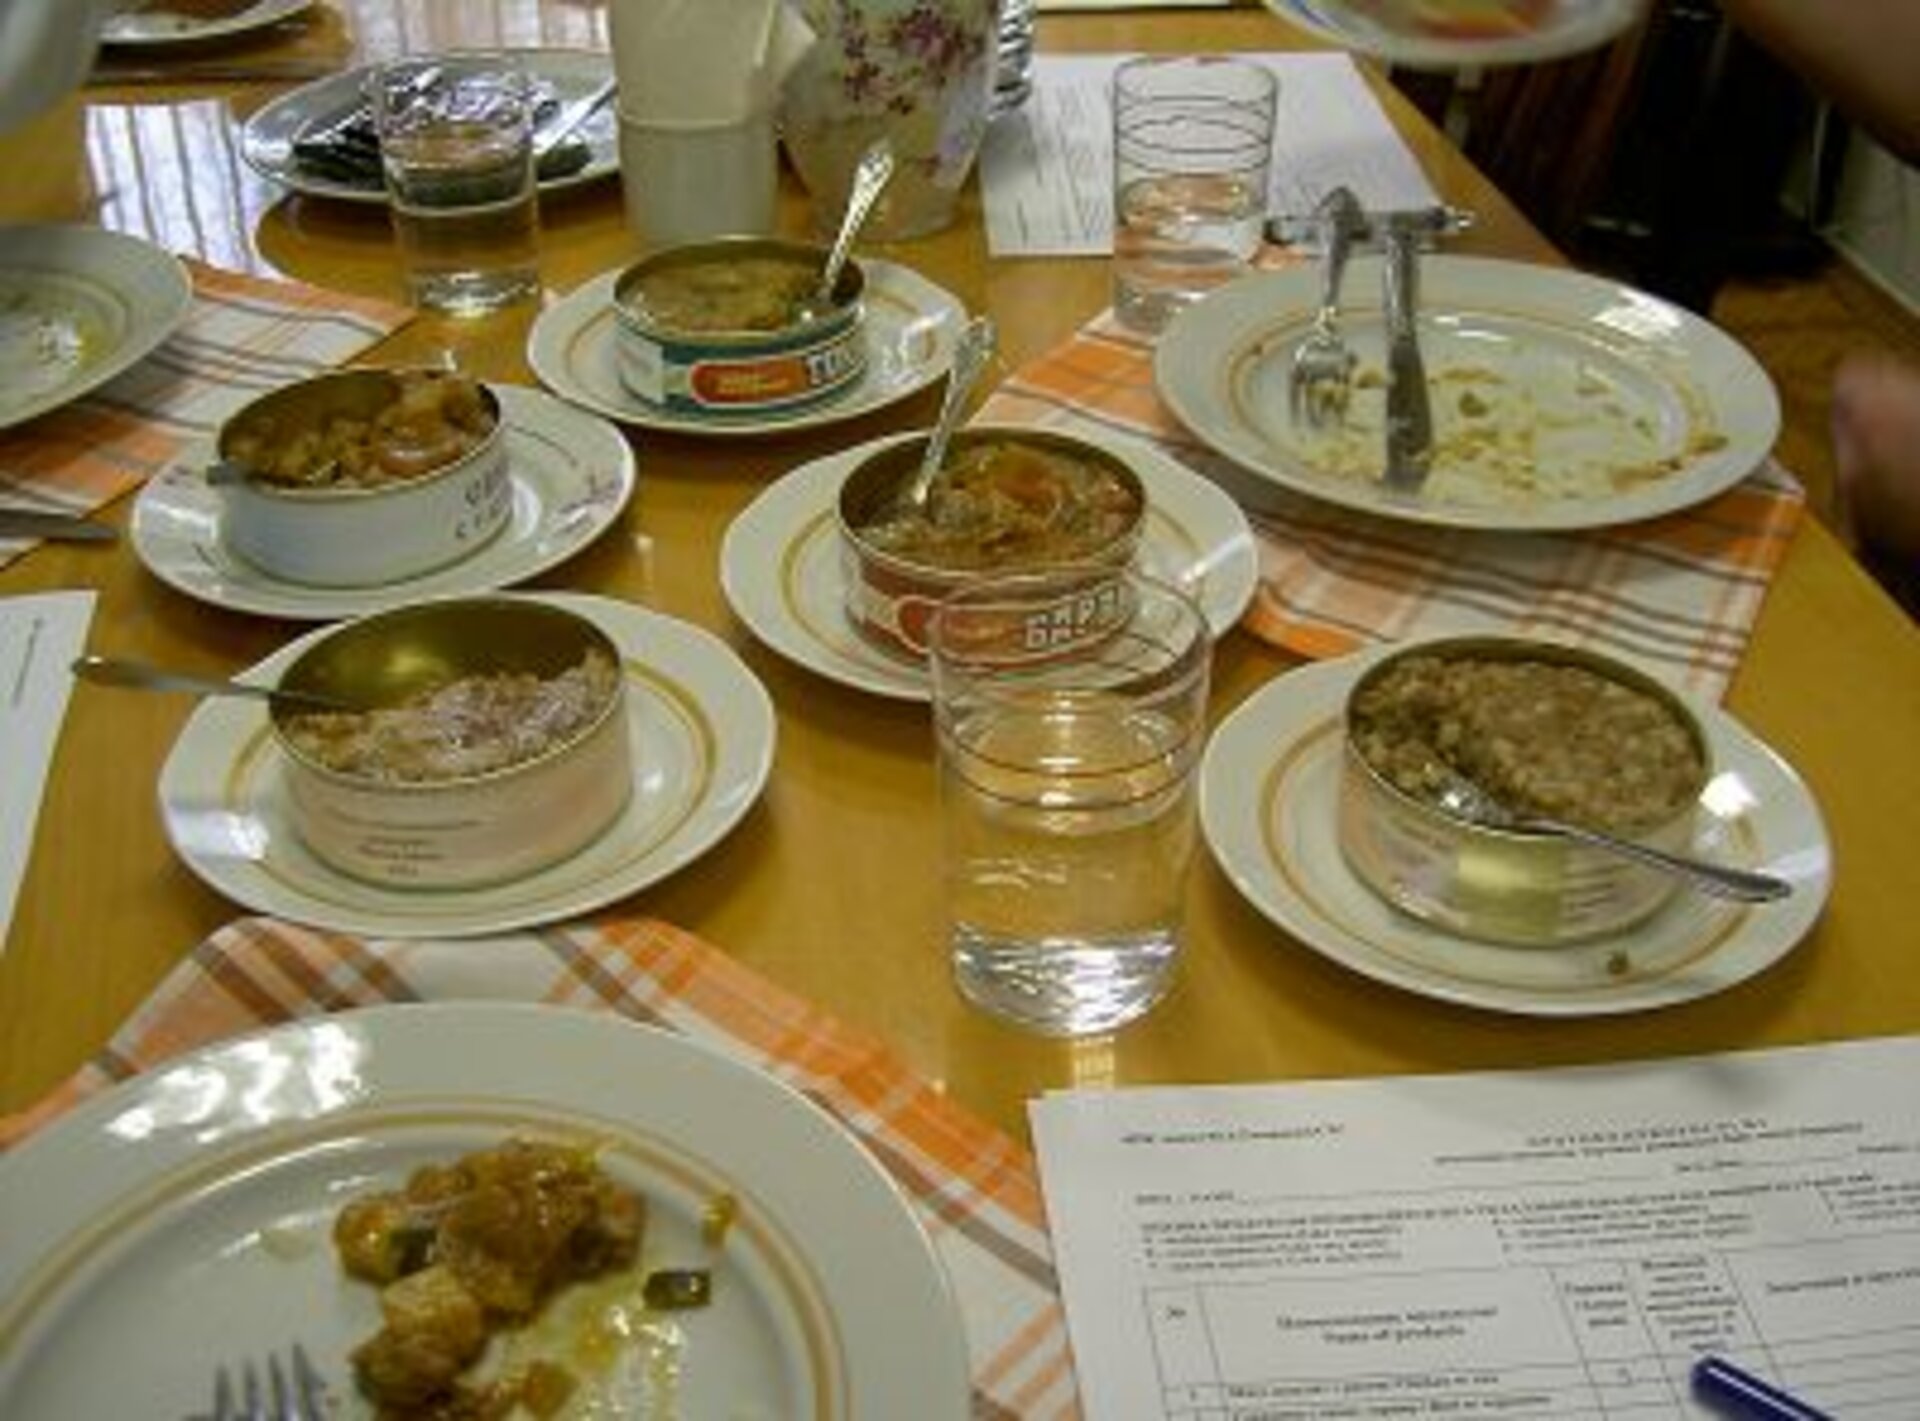 Tasting session with Russian cosmonaut food